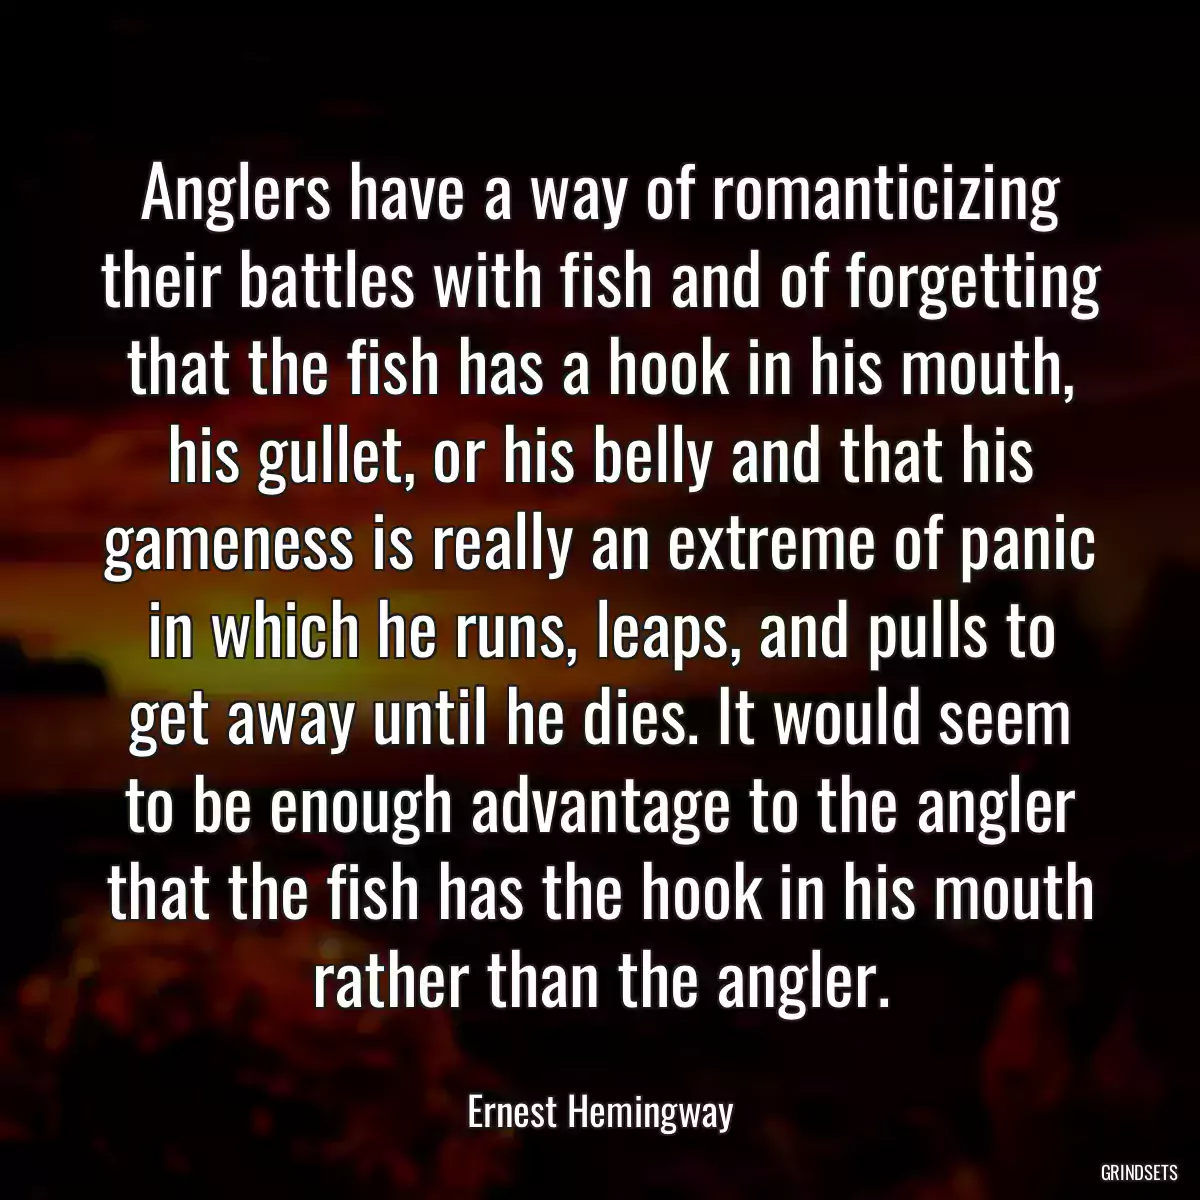 Anglers have a way of romanticizing their battles with fish and of forgetting that the fish has a hook in his mouth, his gullet, or his belly and that his gameness is really an extreme of panic in which he runs, leaps, and pulls to get away until he dies. It would seem to be enough advantage to the angler that the fish has the hook in his mouth rather than the angler.